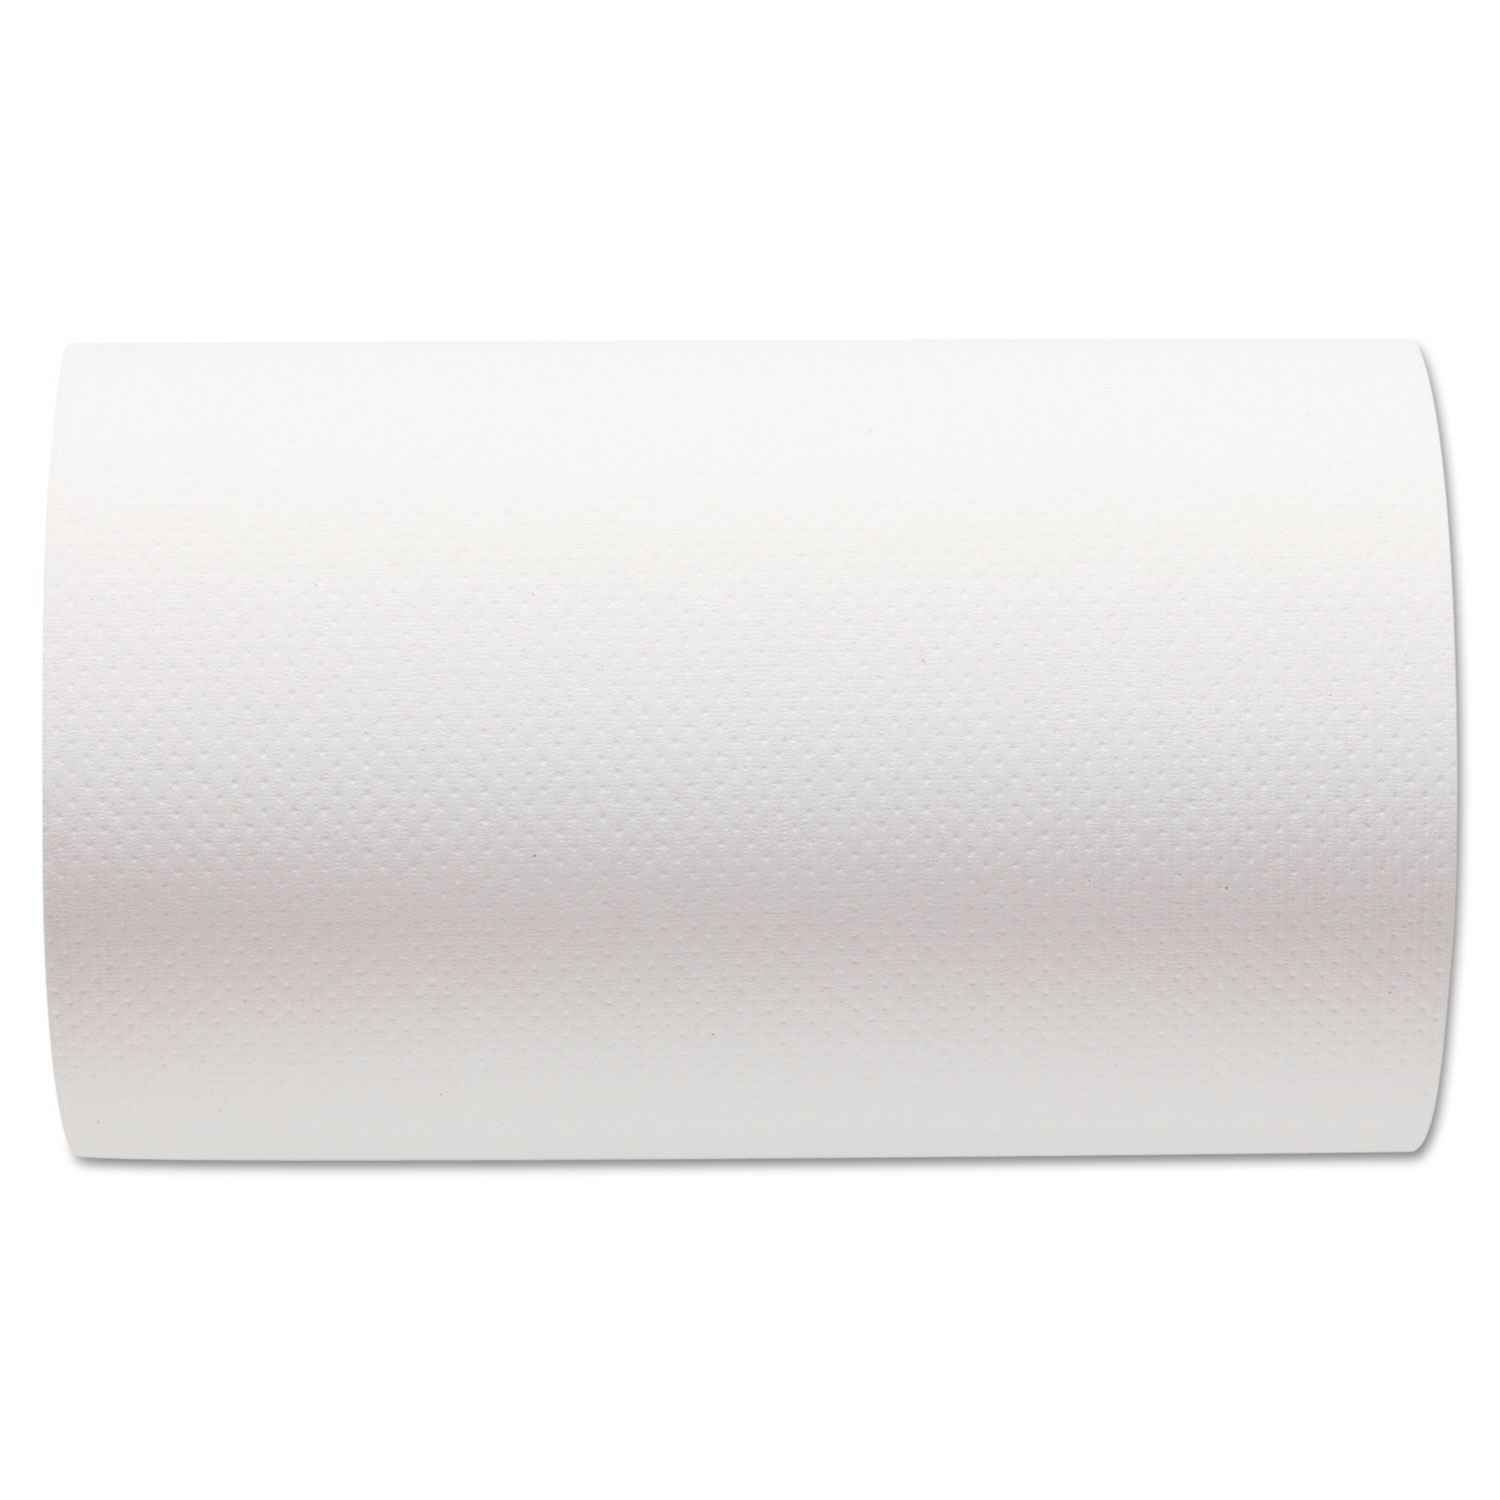  Georgia Pacific Professional 26610 Hardwound Paper Towel Roll, Nonperforated, 9 x 400ft, White, 6 Rolls/Carton (GPC26610) 